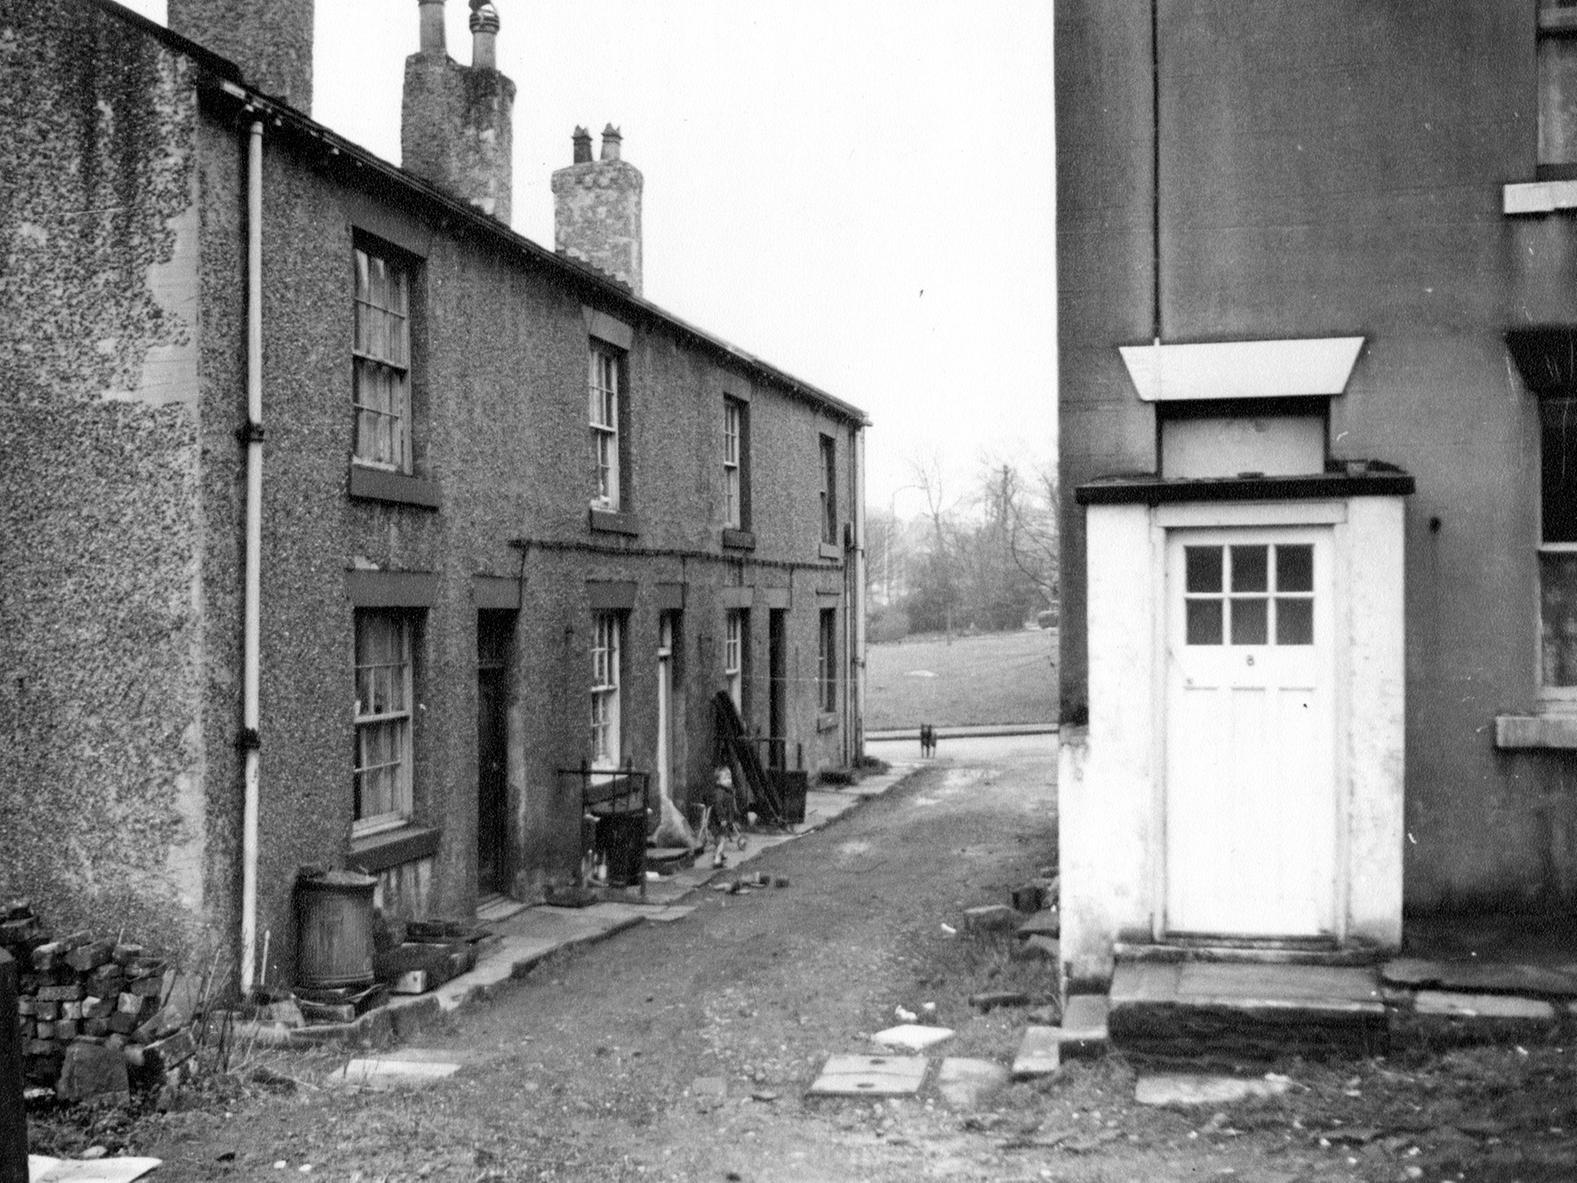 A view looking on to Mill Lane. Unmade access to houses on the left. Some are back-to-back while the one actually on Mill Lane is a through terrace. A small boy and a dog can be seen outside the houses.